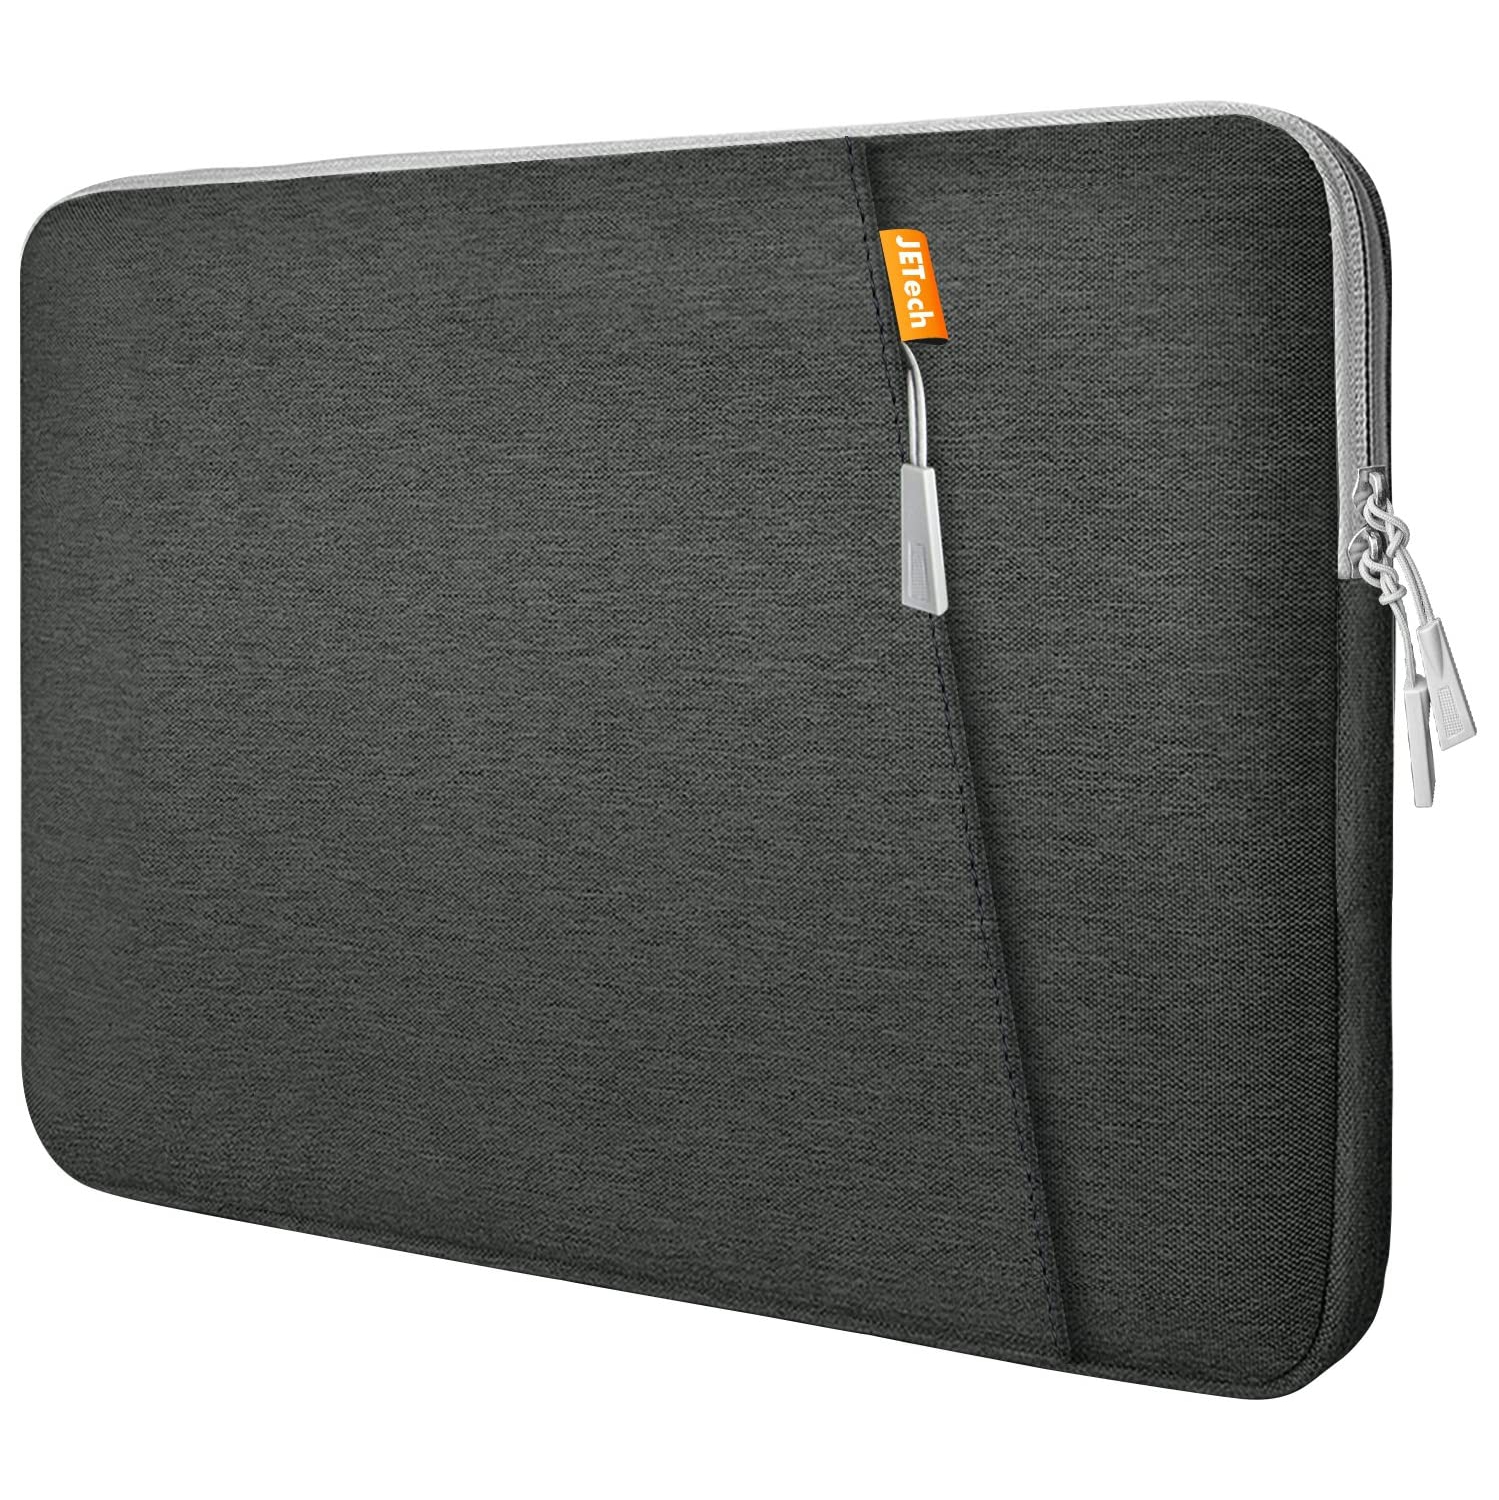 Laptop Sleeve for 15.4-Inch Notebook Tablet iPad Tab, Compatible with 16" MacBook Pro, Waterproof Shock